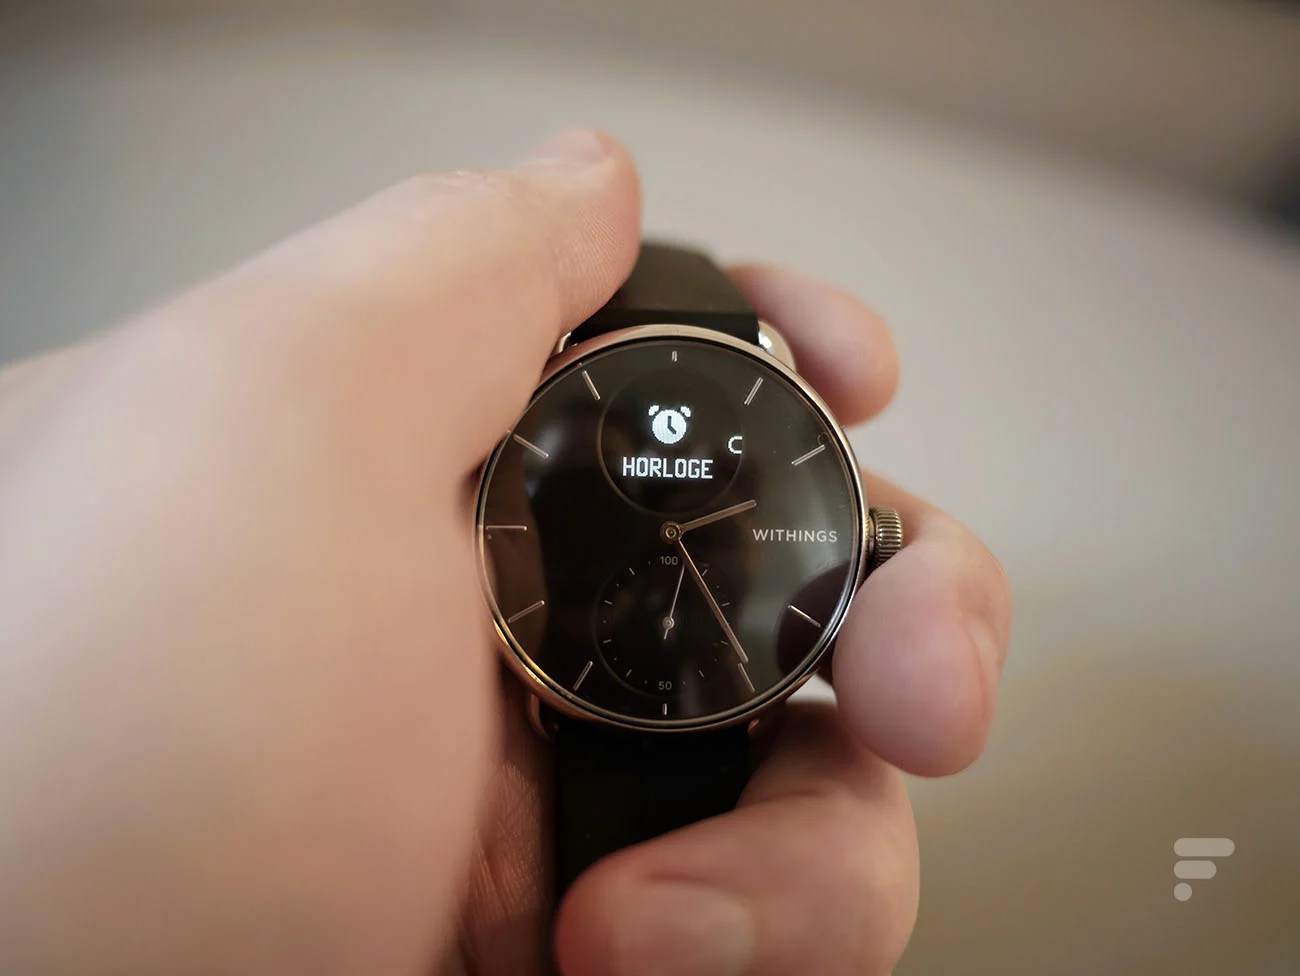 La Withings ScanWatch // Source : Frandroid